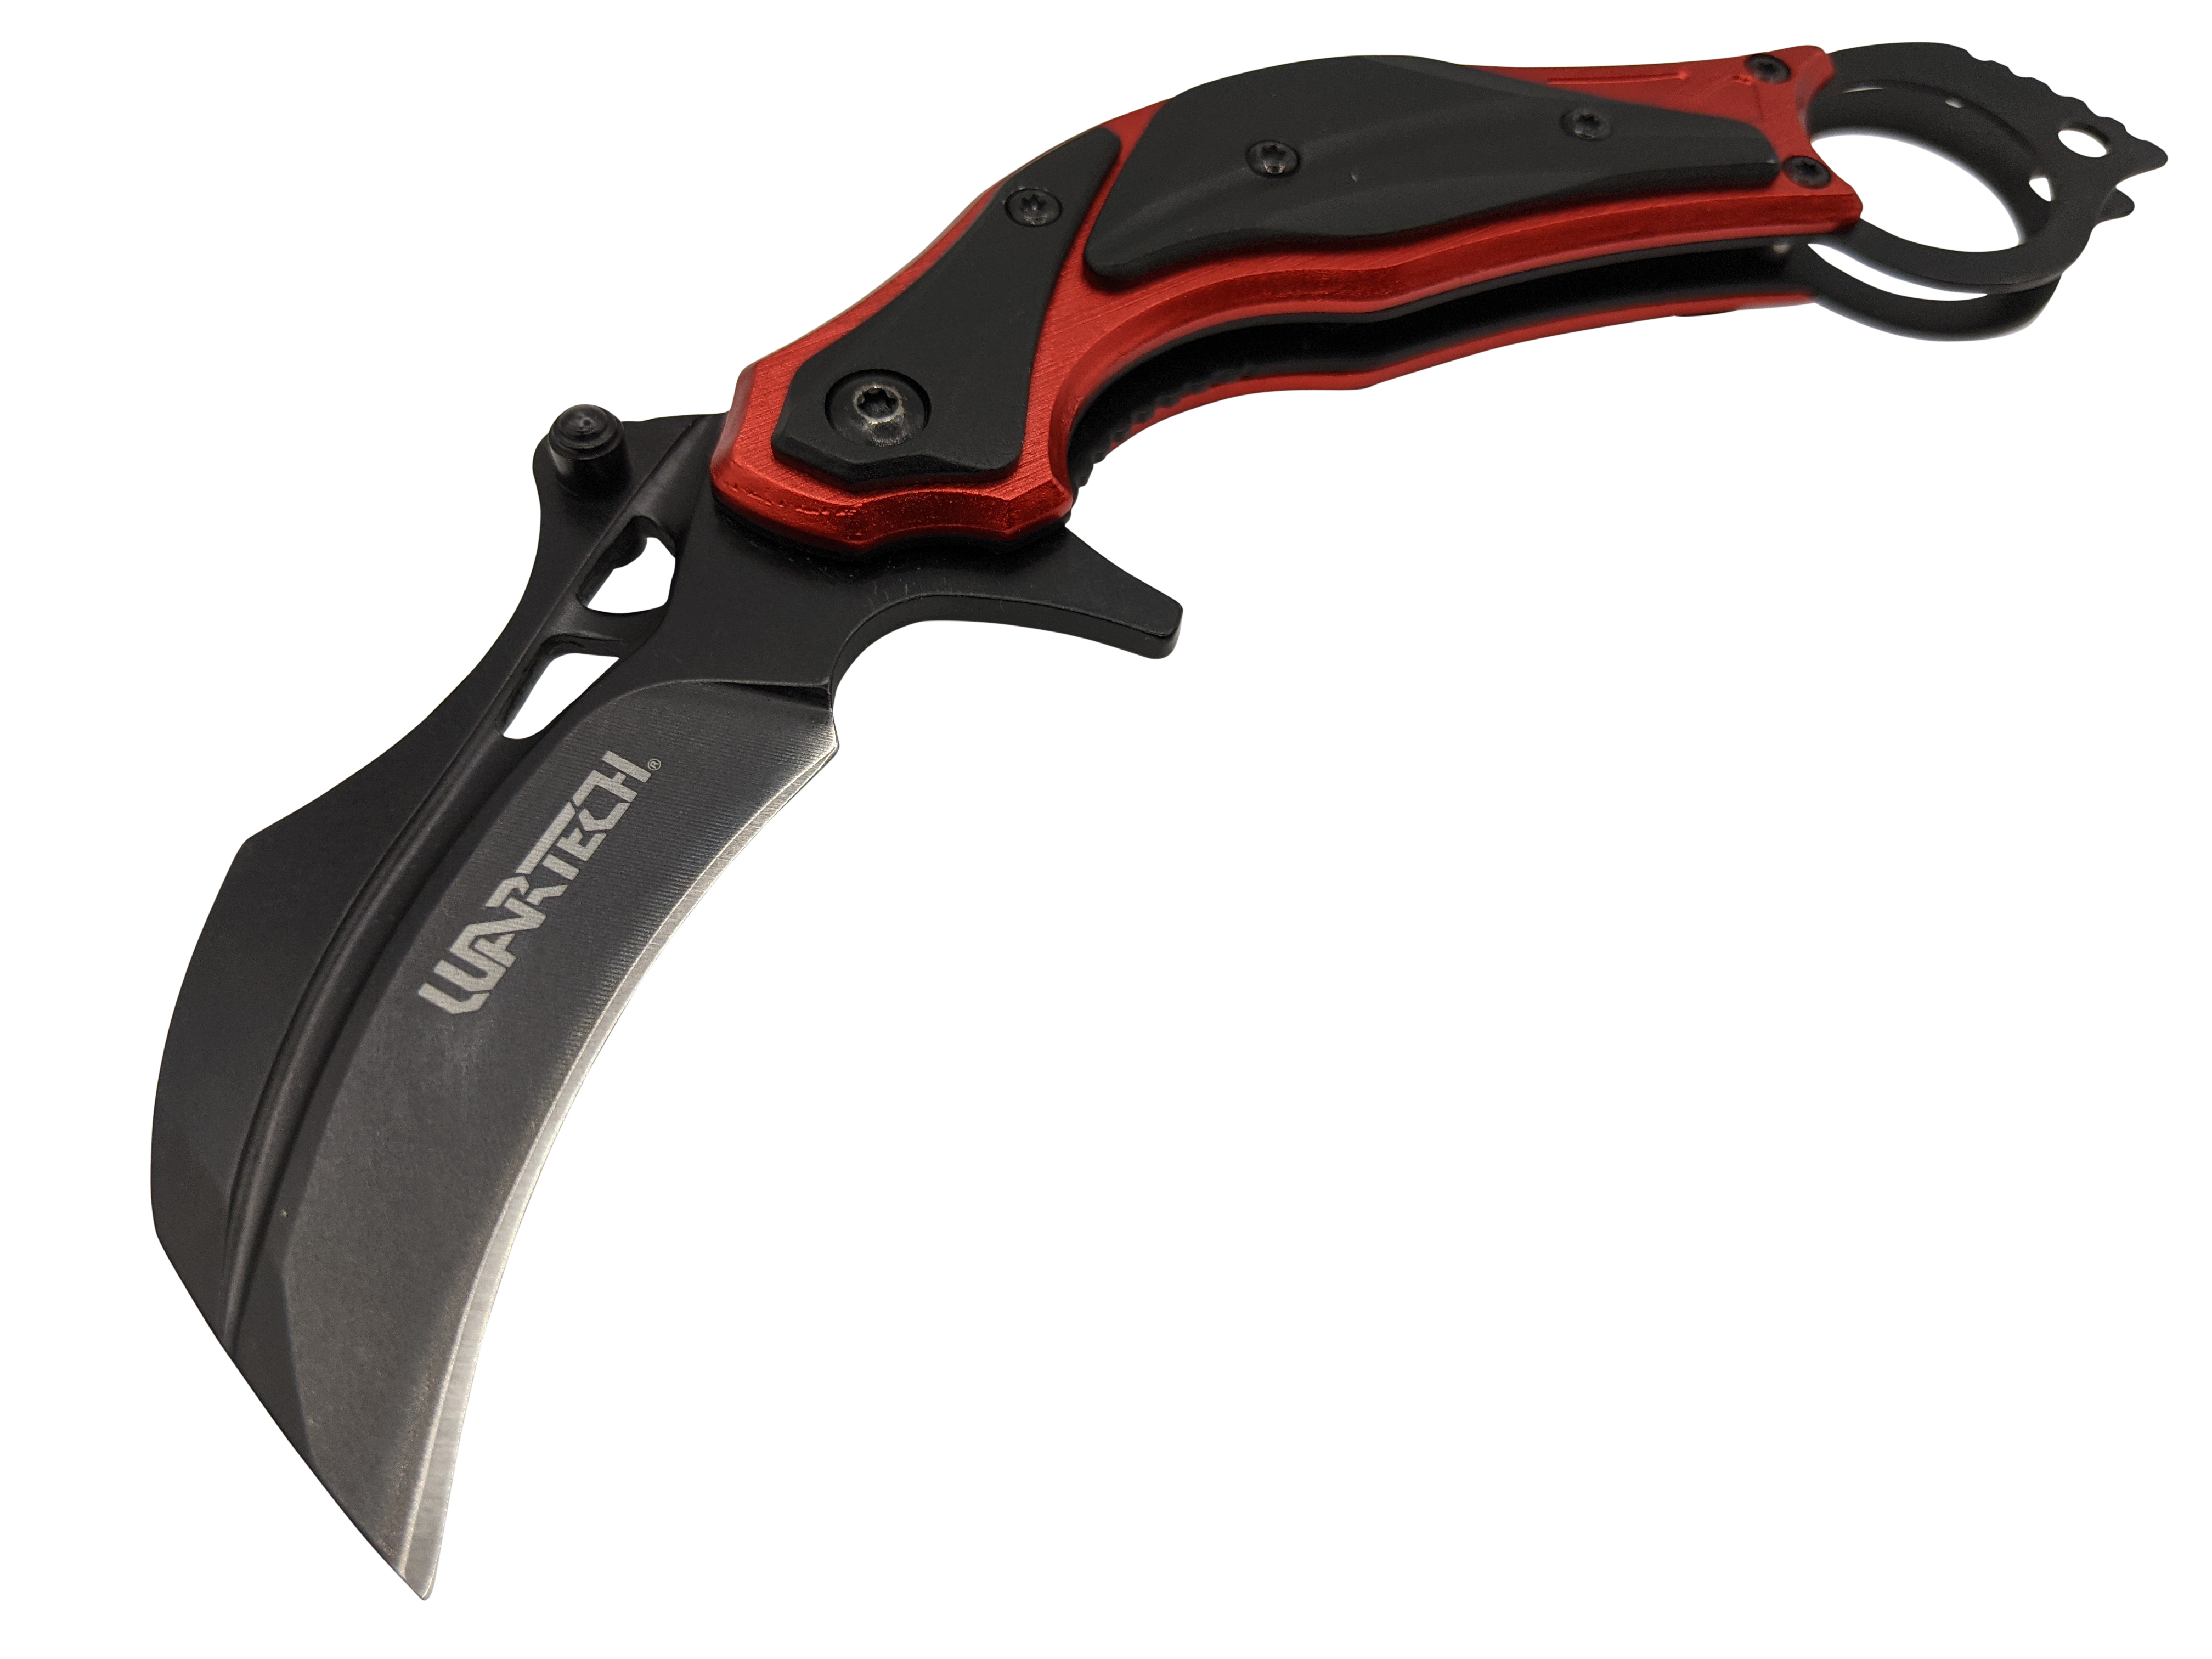 Spring-Assist Folding Knife Wartech Tactical Karambit 3in. Claw Blade Red/Black